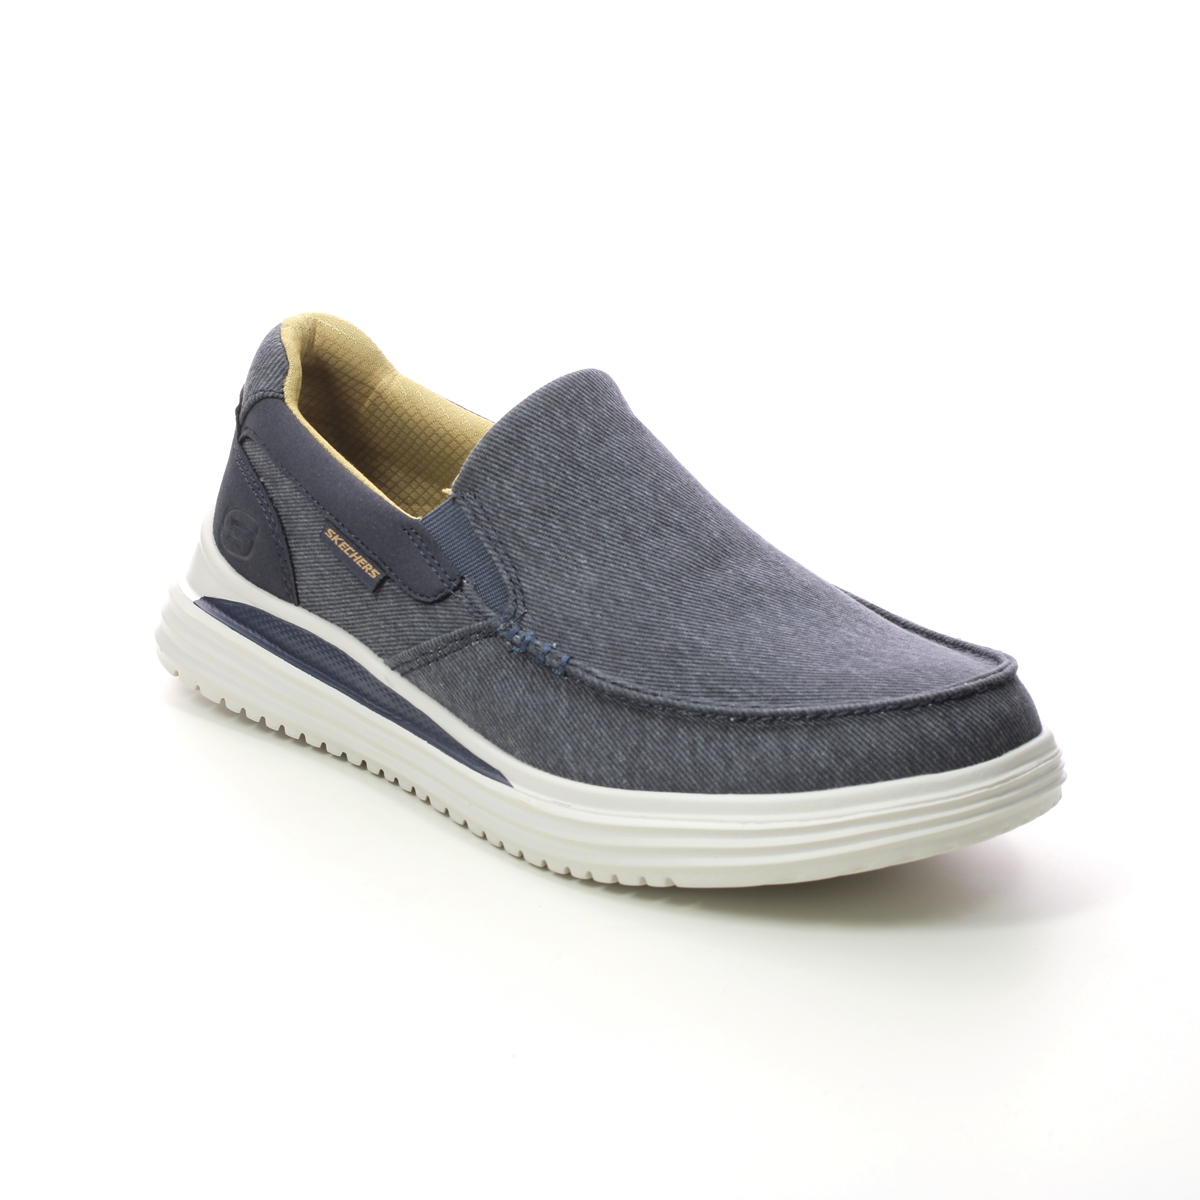 Skechers Proven Everson 204785 NVY Navy Slip-on Shoes